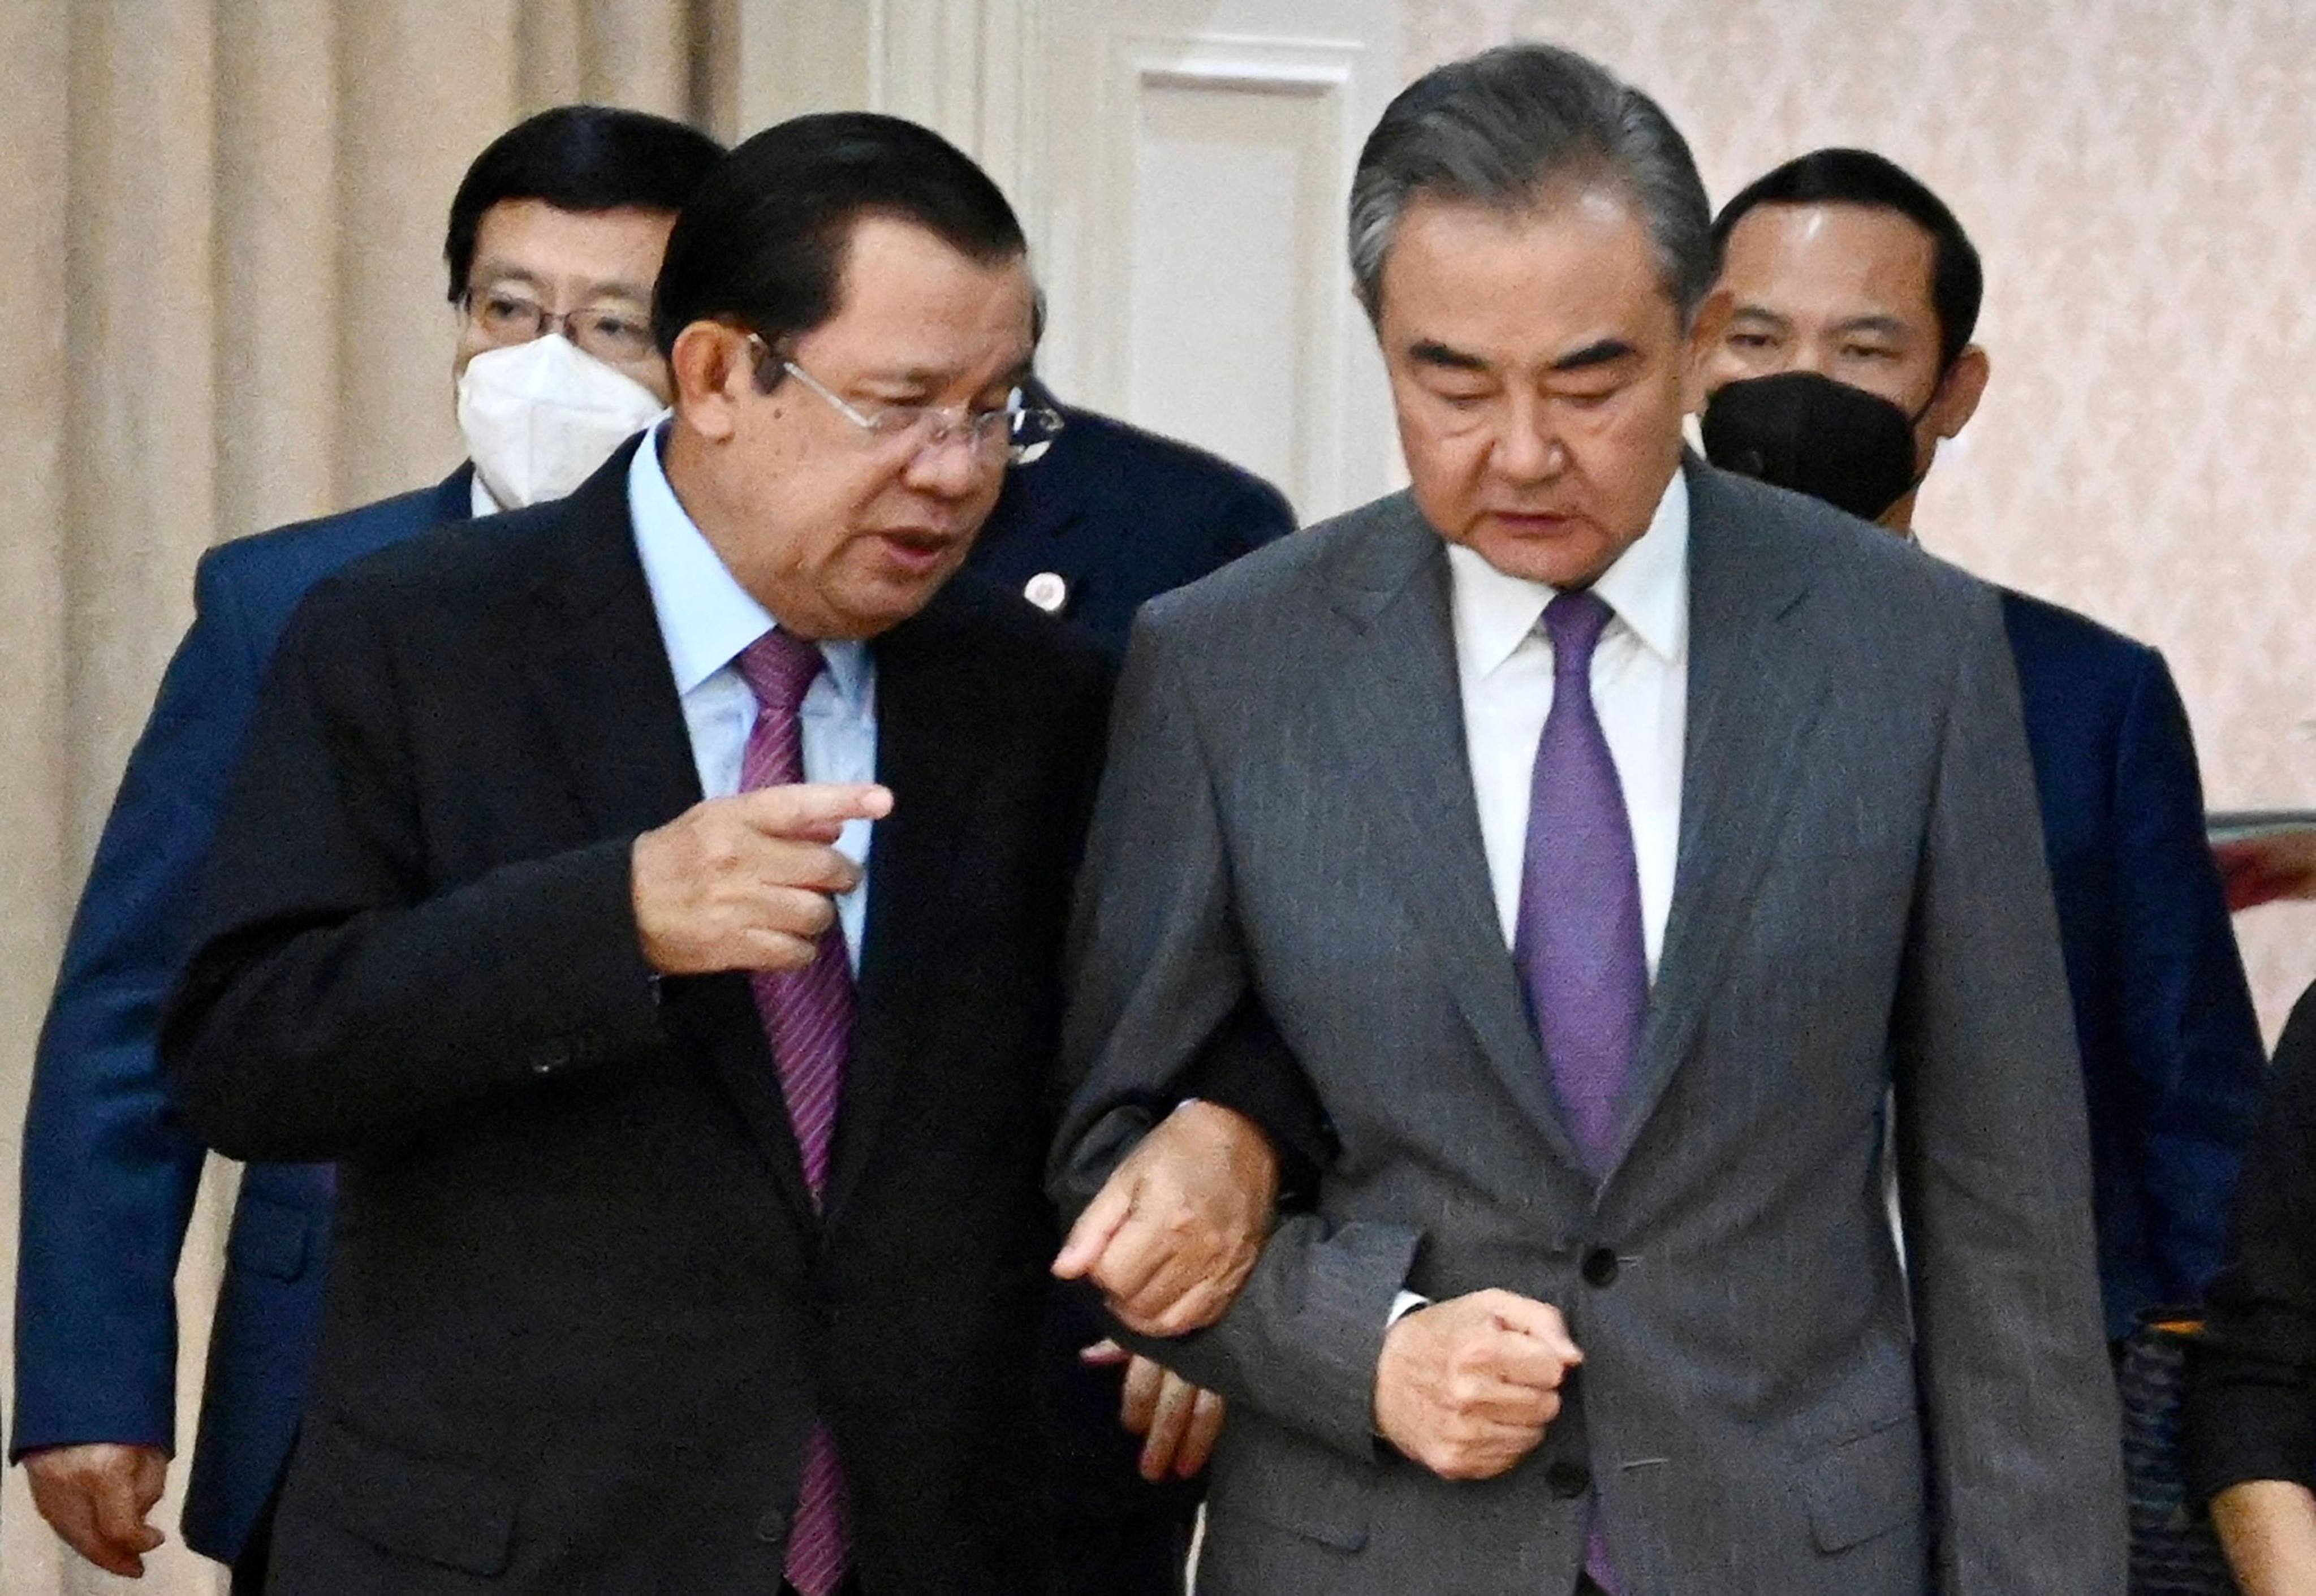 Cambodia’s Prime Minister Hun Sen (L) linking arms with China’s Foreign Minister Wang Yi (R) during a meeting at the Peace Palace in Phnom Penh in August 2022. Photo: Cambodia’s government cabinet/Handout via AFP/File